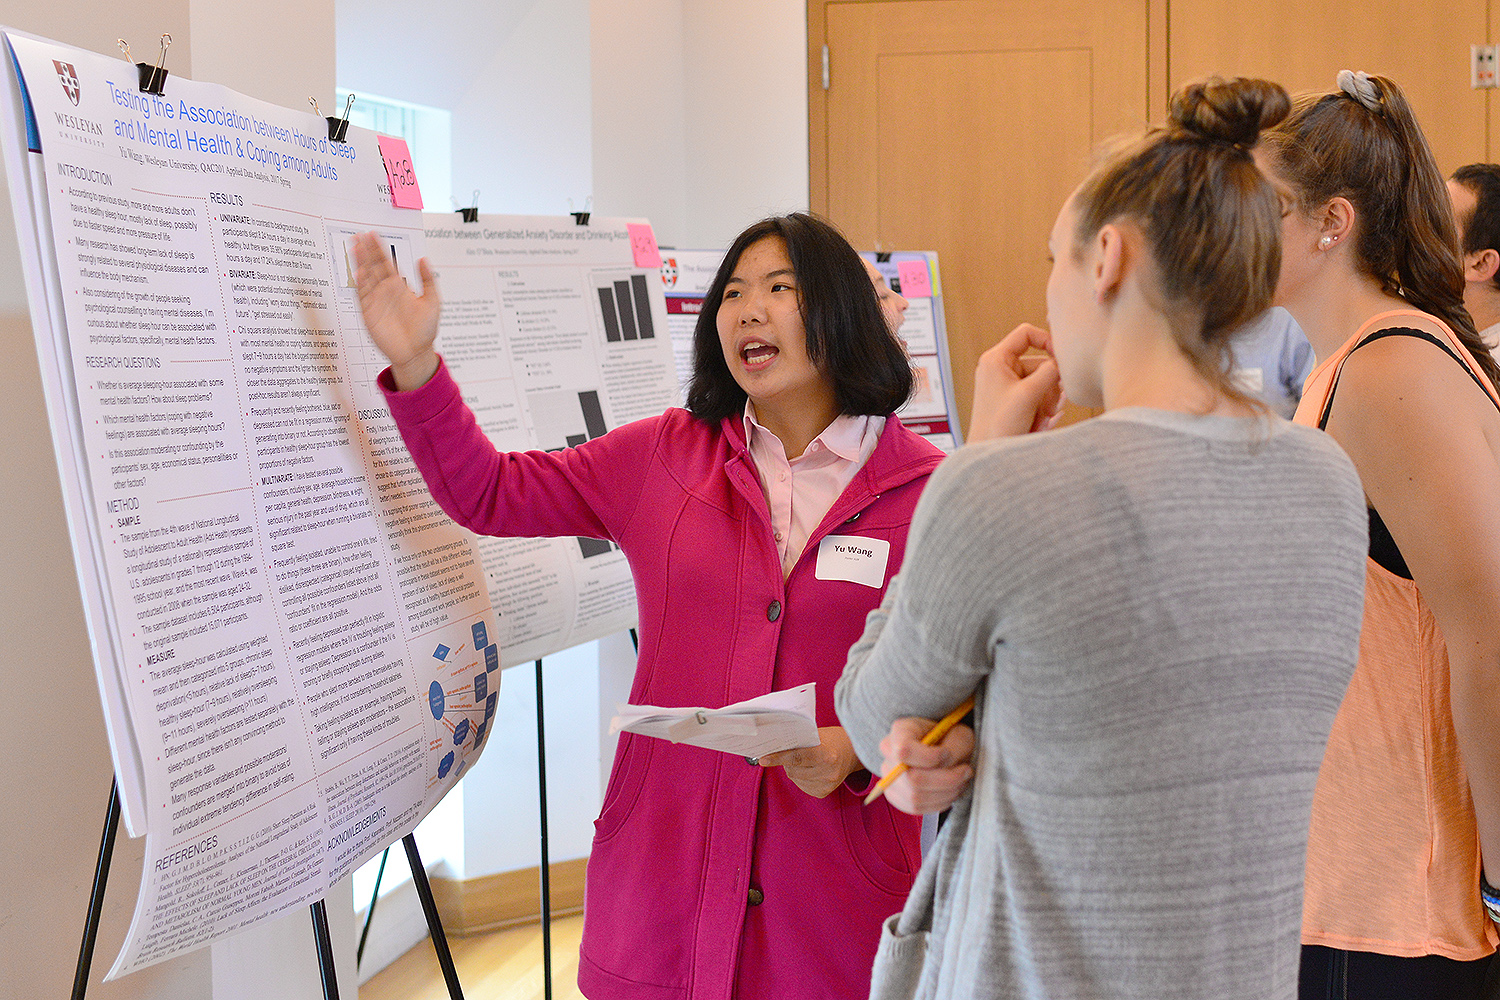 Yu Wang '19 spoke about her research titled "Testing the Association between Hours of Sleep and Mental Health and Coping among Adults."